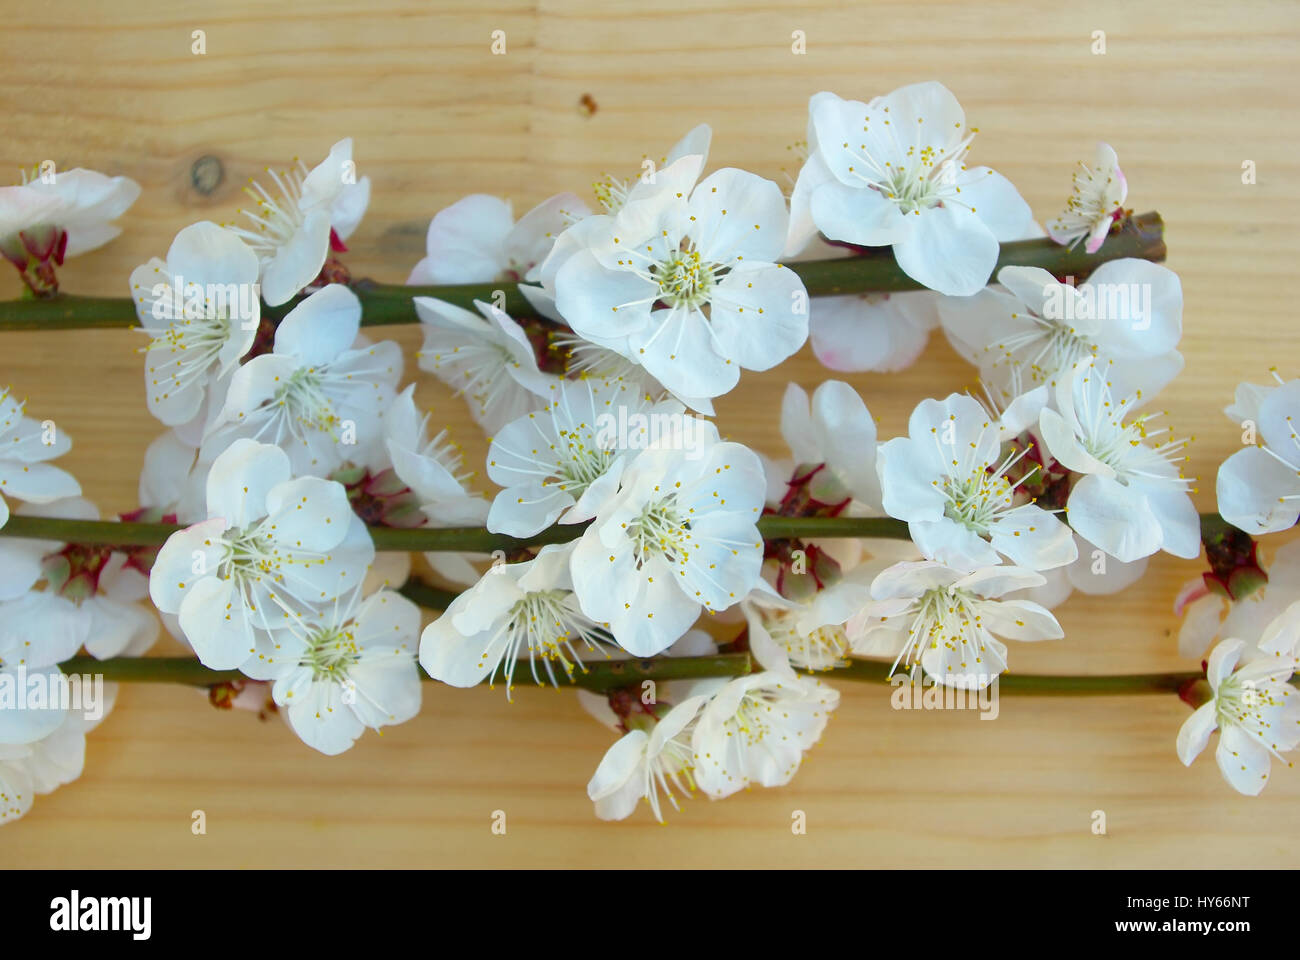 Spring white blossom on wood texture background. Seasonal blossoming springtime. Bloom closeup. April flower tree branch composition. Stock Photo